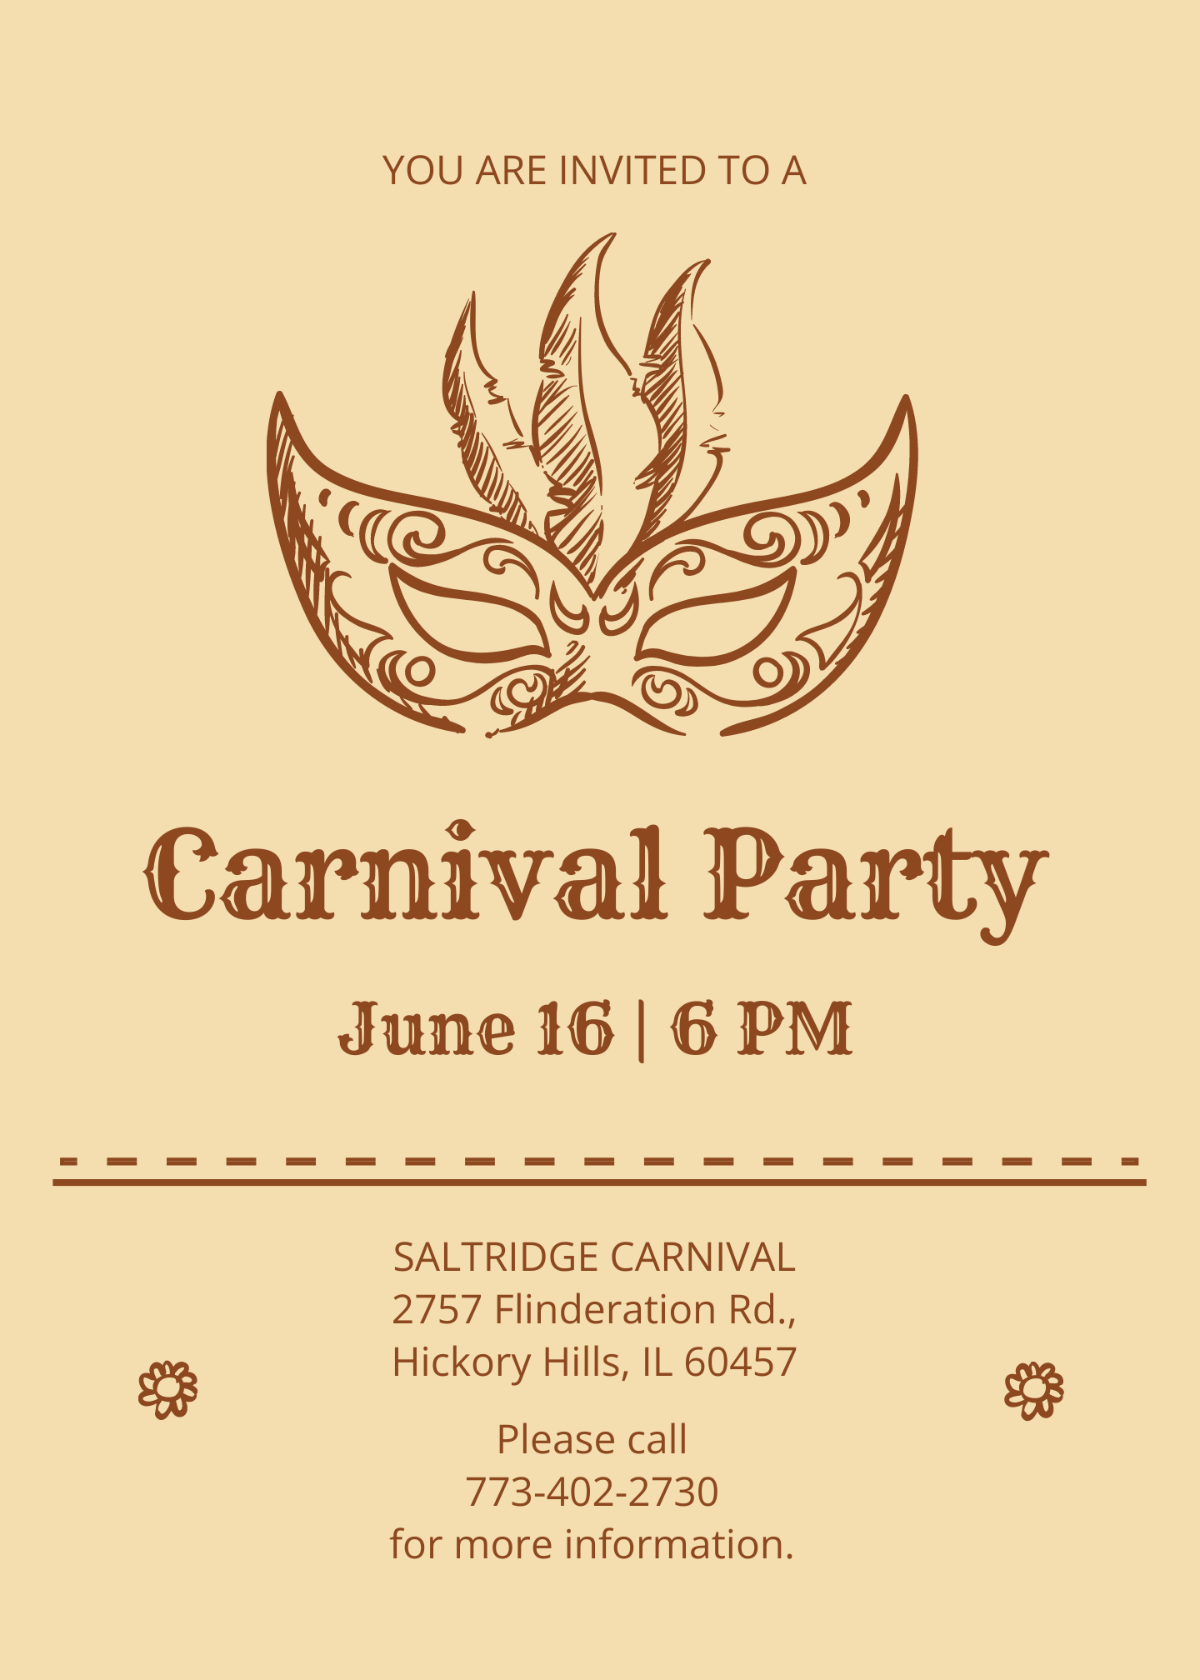 Vintage Carnival Party Invitation Template